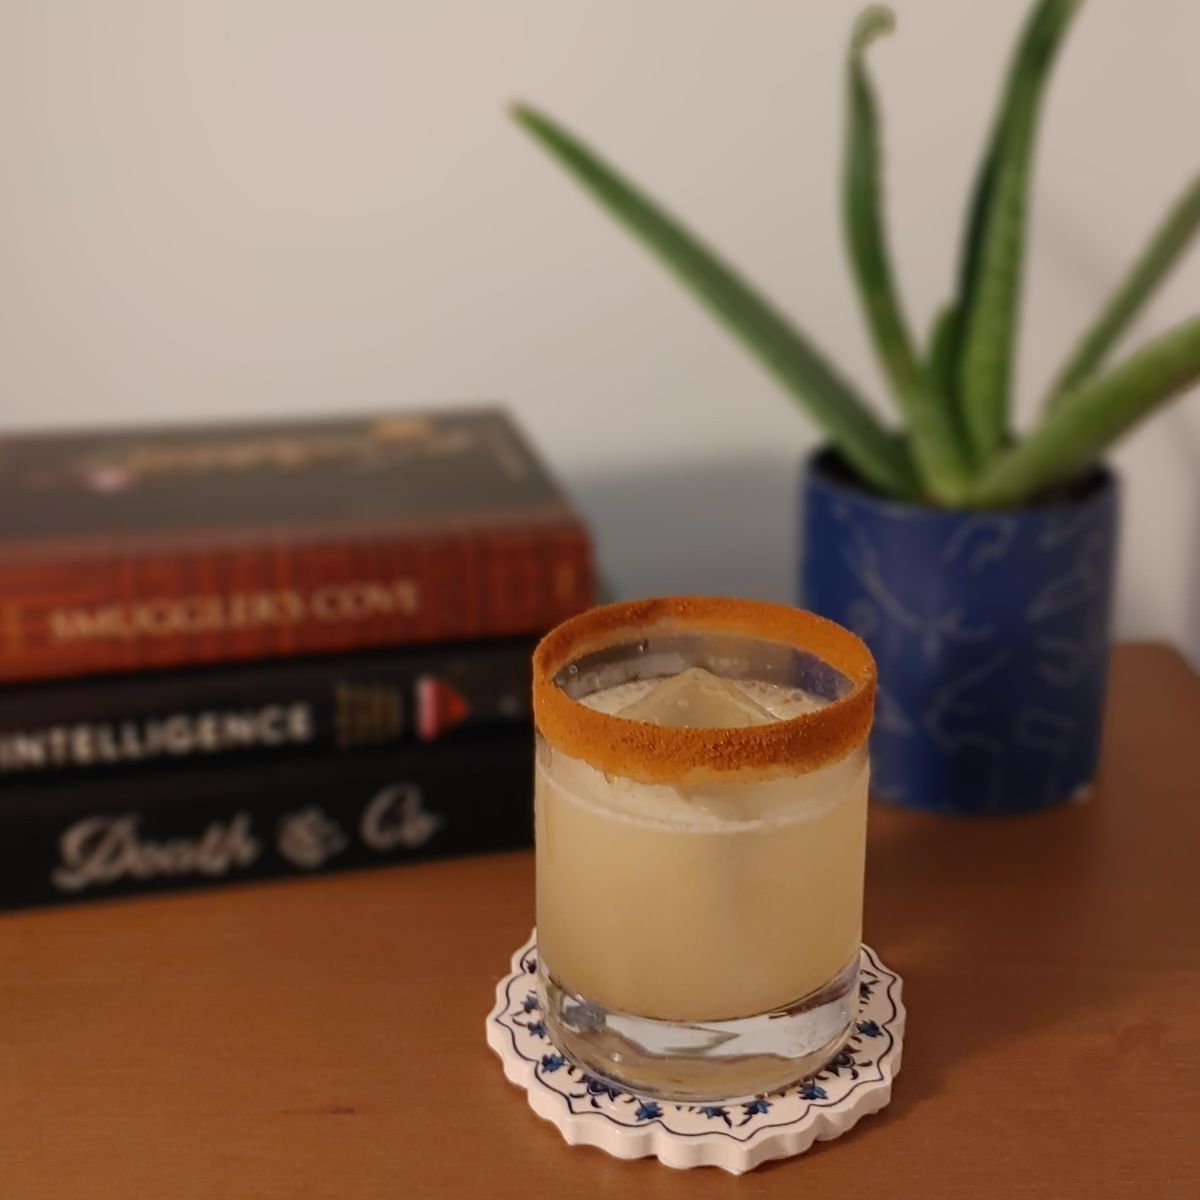 My take on a Margarita using one of my favourite styles of rum